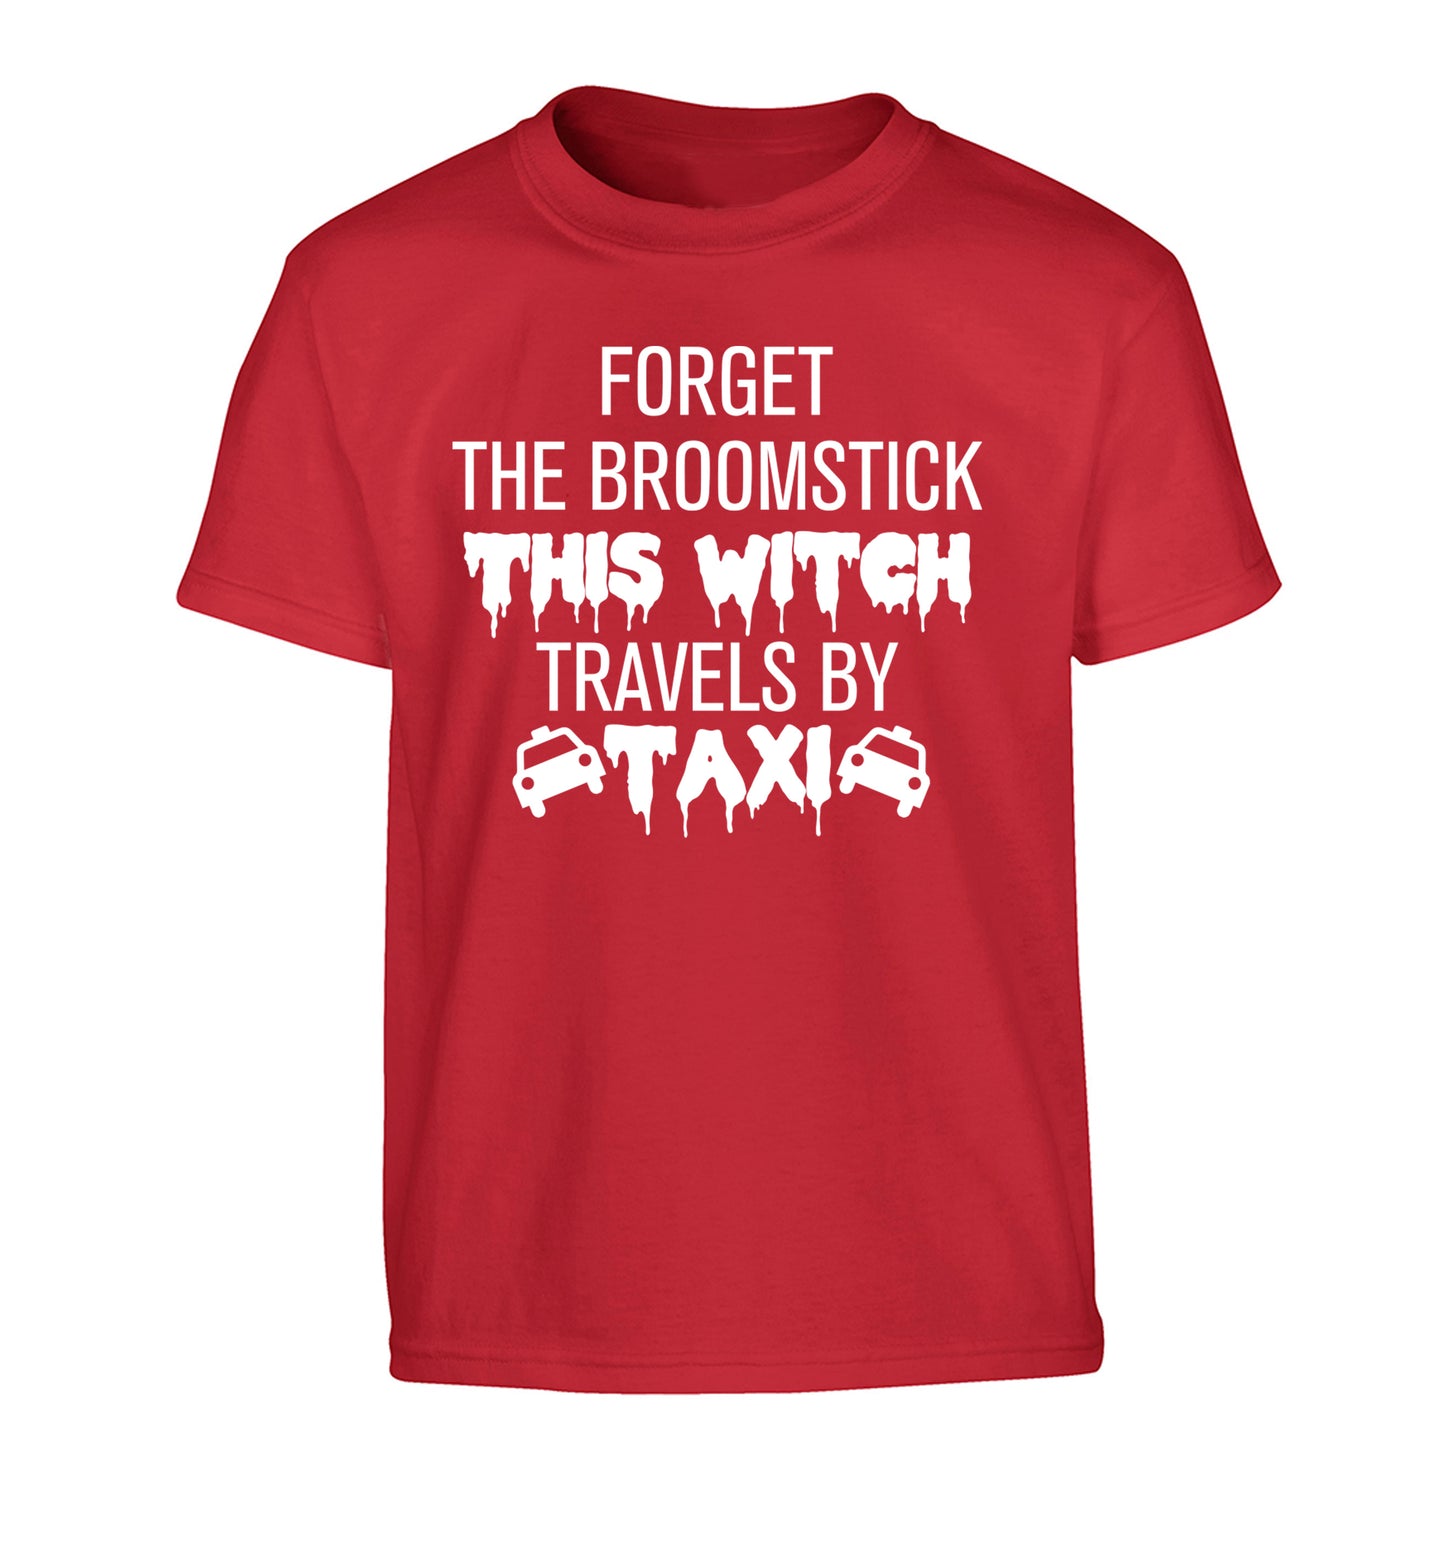 Forget the broomstick this witch travels by taxi Children's red Tshirt 12-14 Years